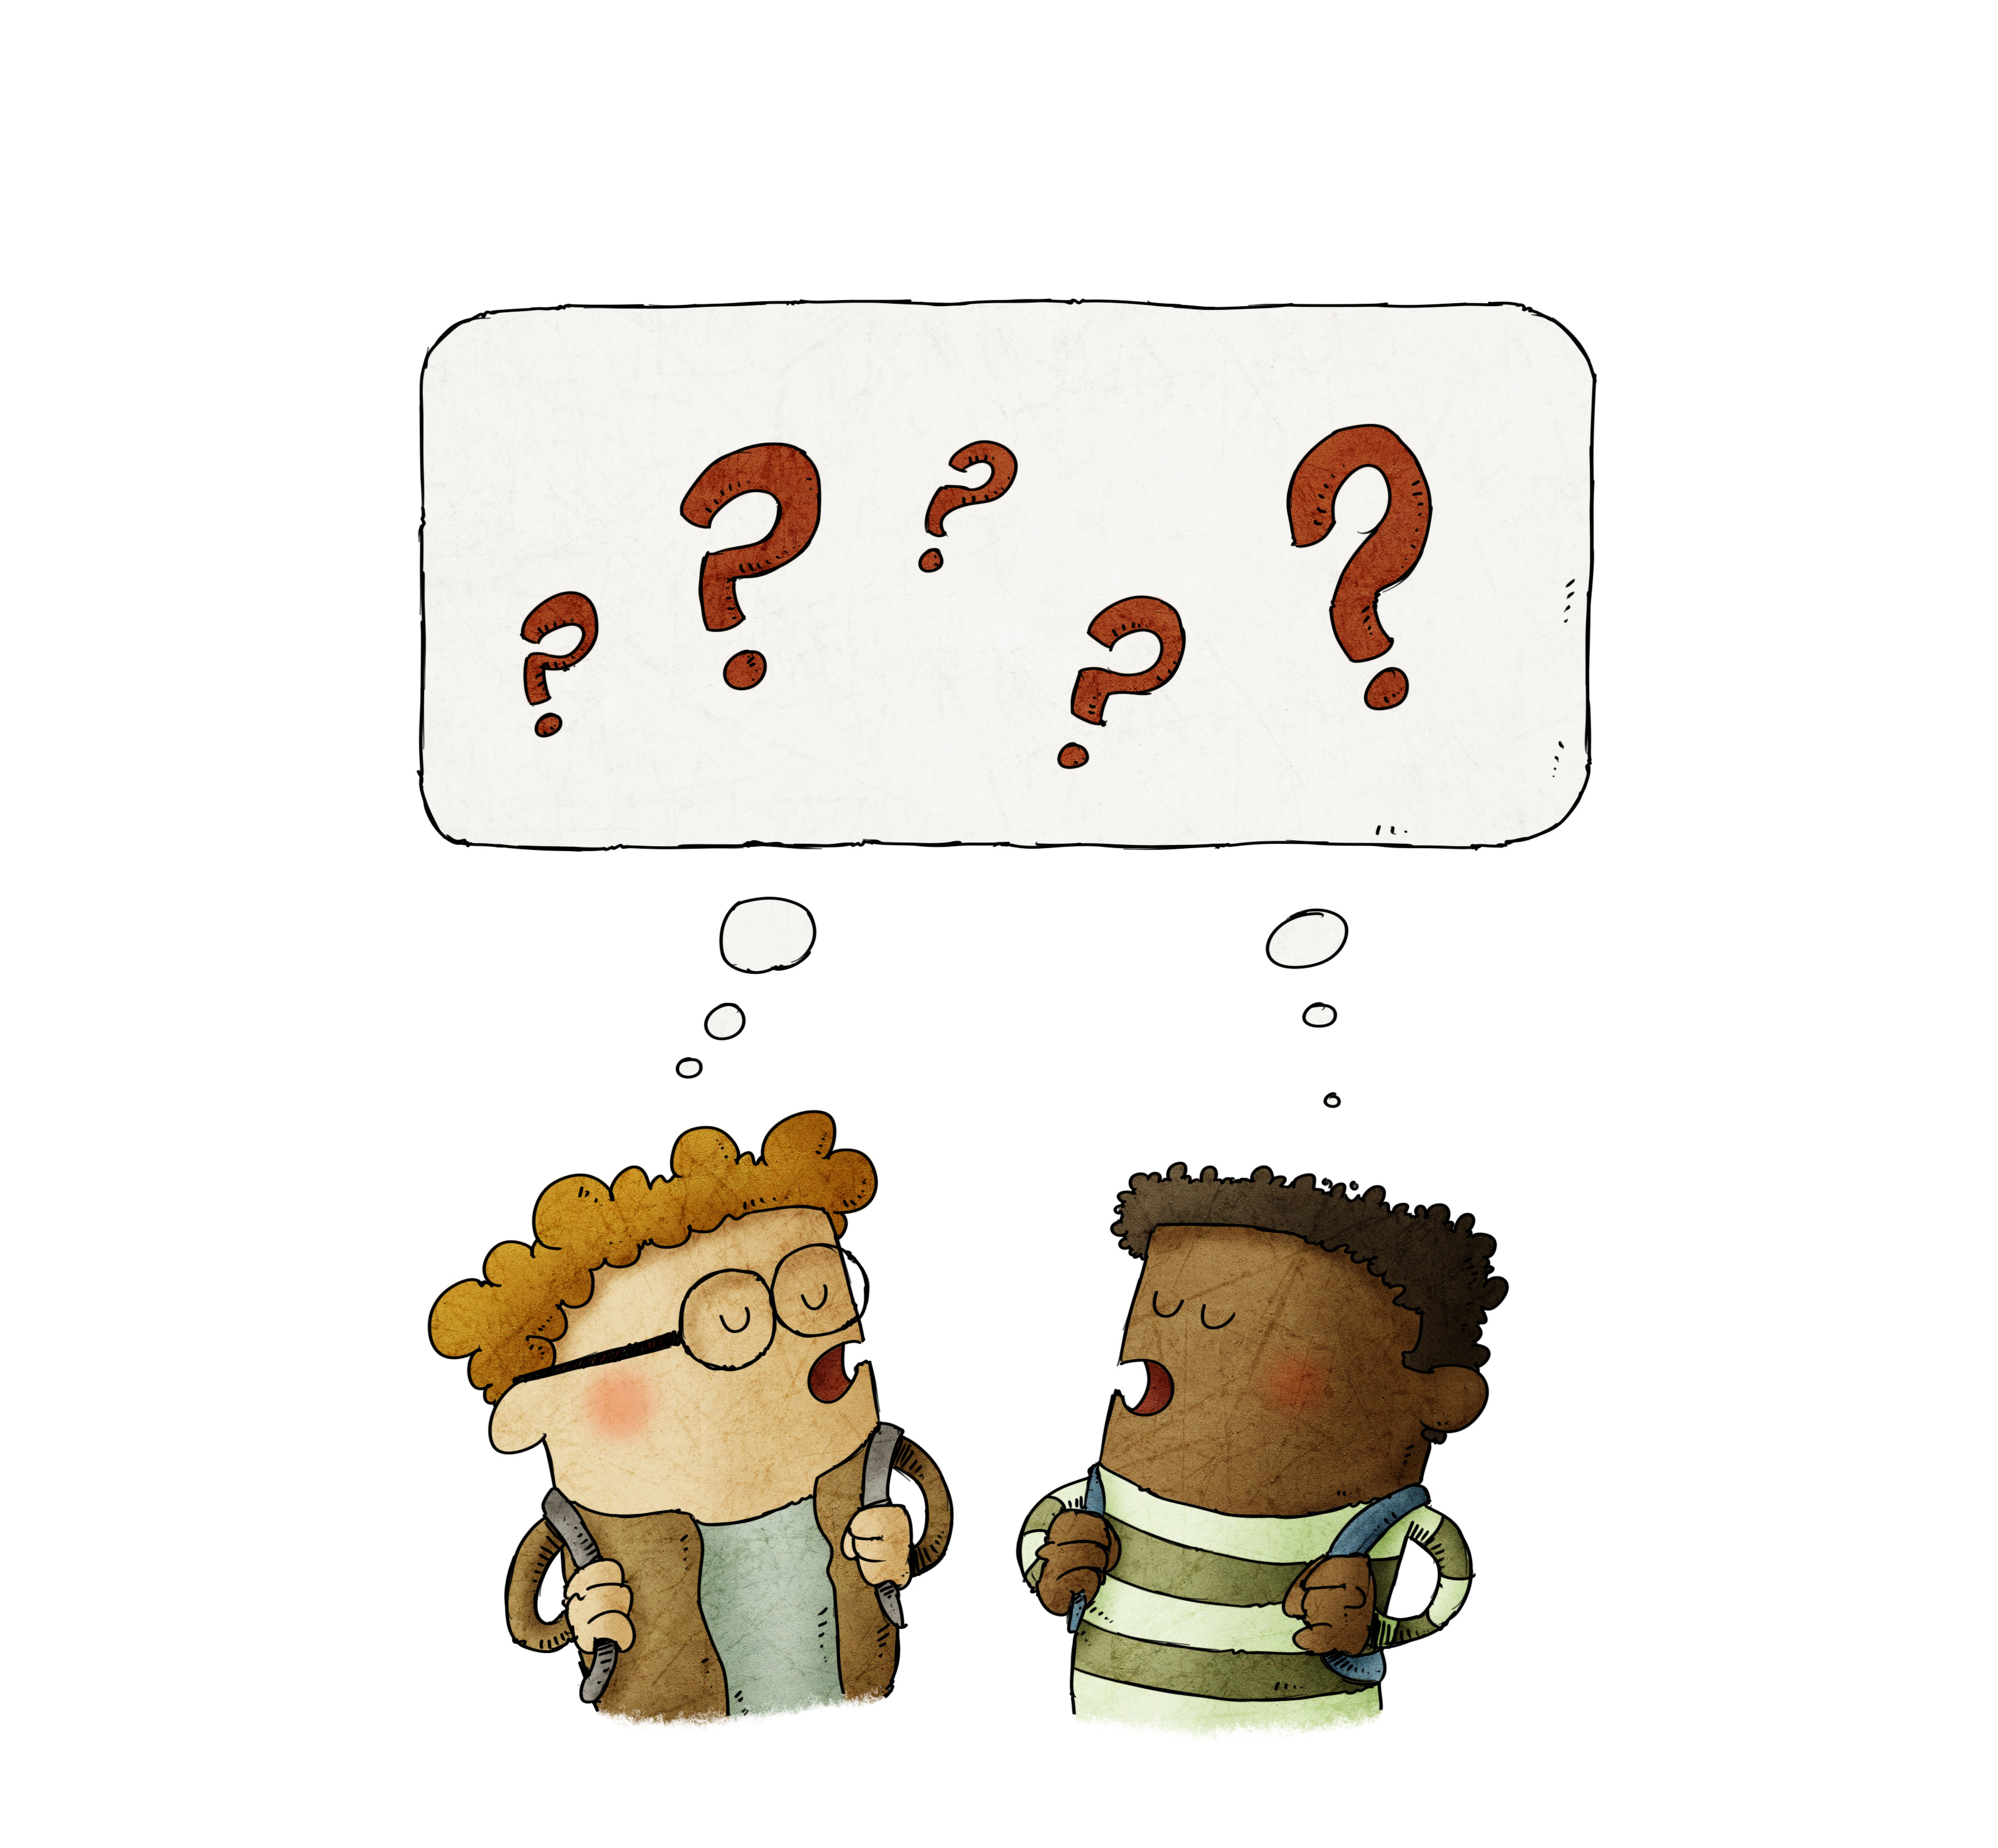 cartoon people with question marks in a speech bubble above them